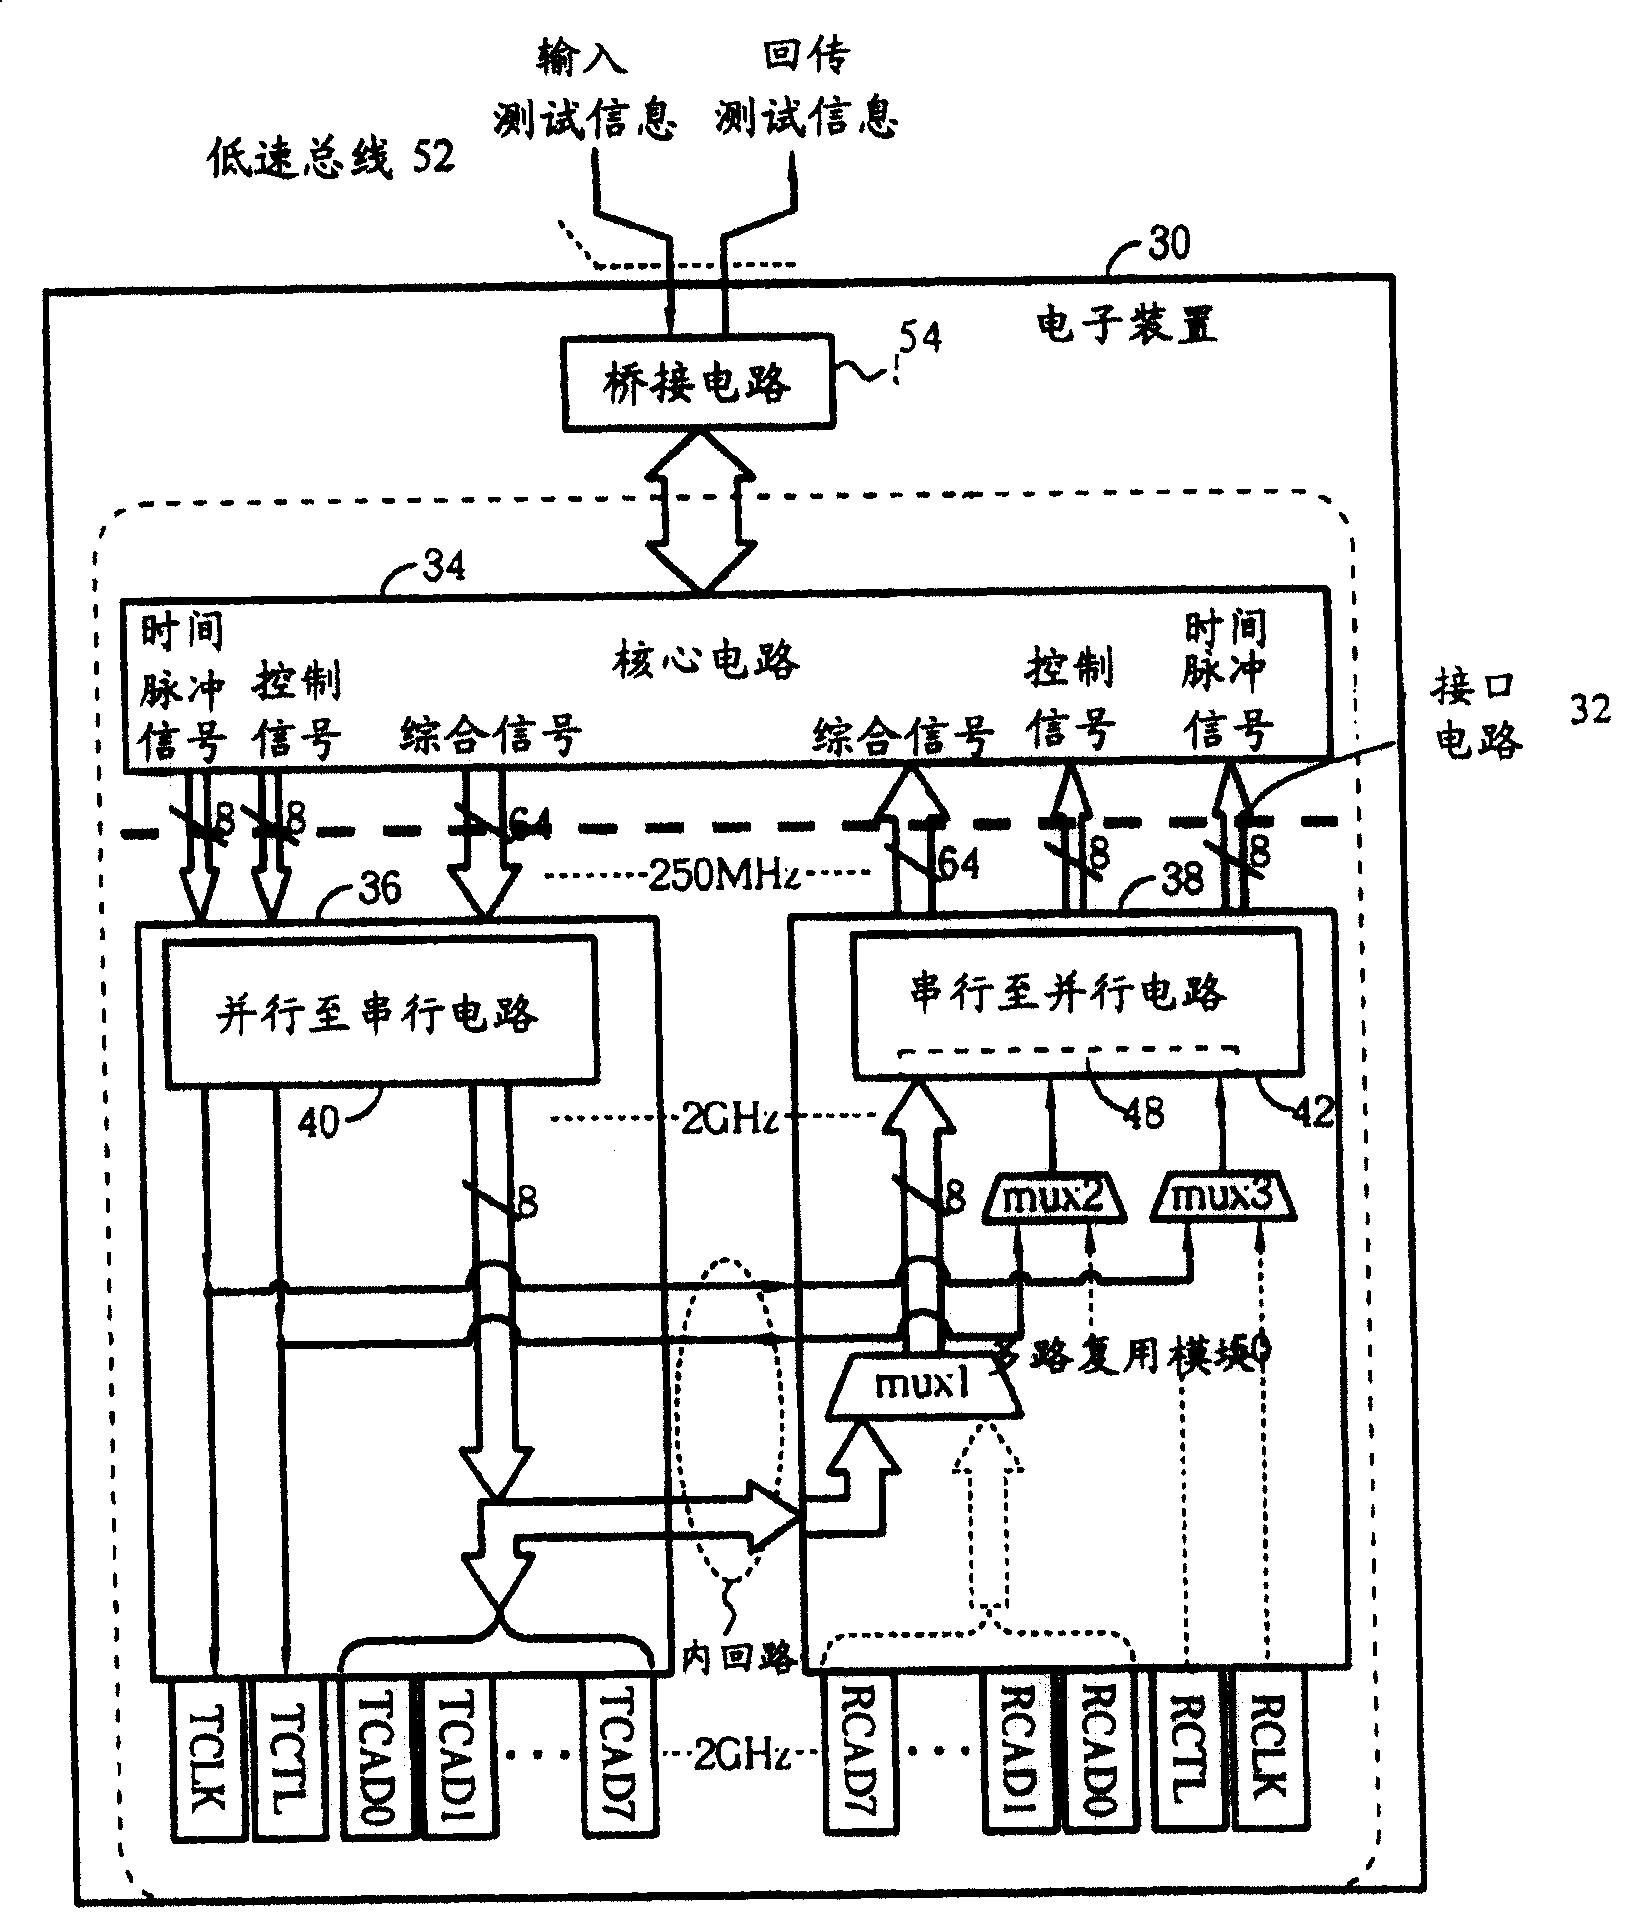 Chip testing mechanism and related method